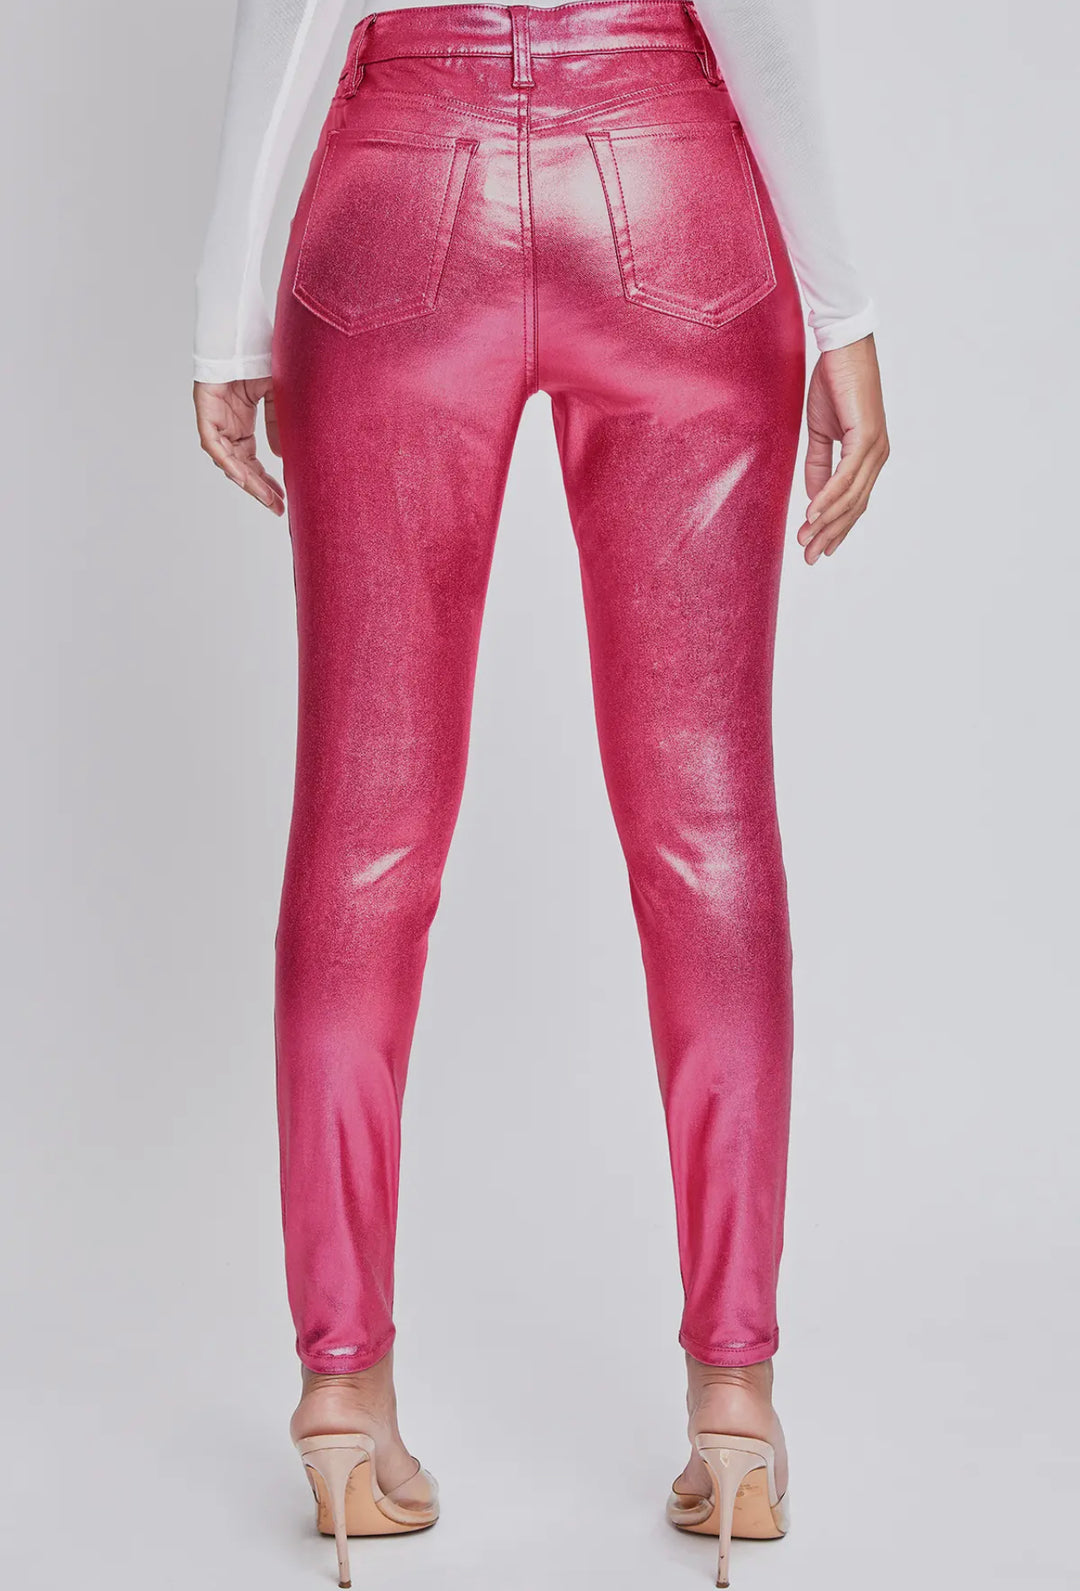 Jazzy YMI High Rise Metallic Skinny Jeans, Hot Pink-Pants-Inspired by Justeen-Women's Clothing Boutique in Chicago, Illinois